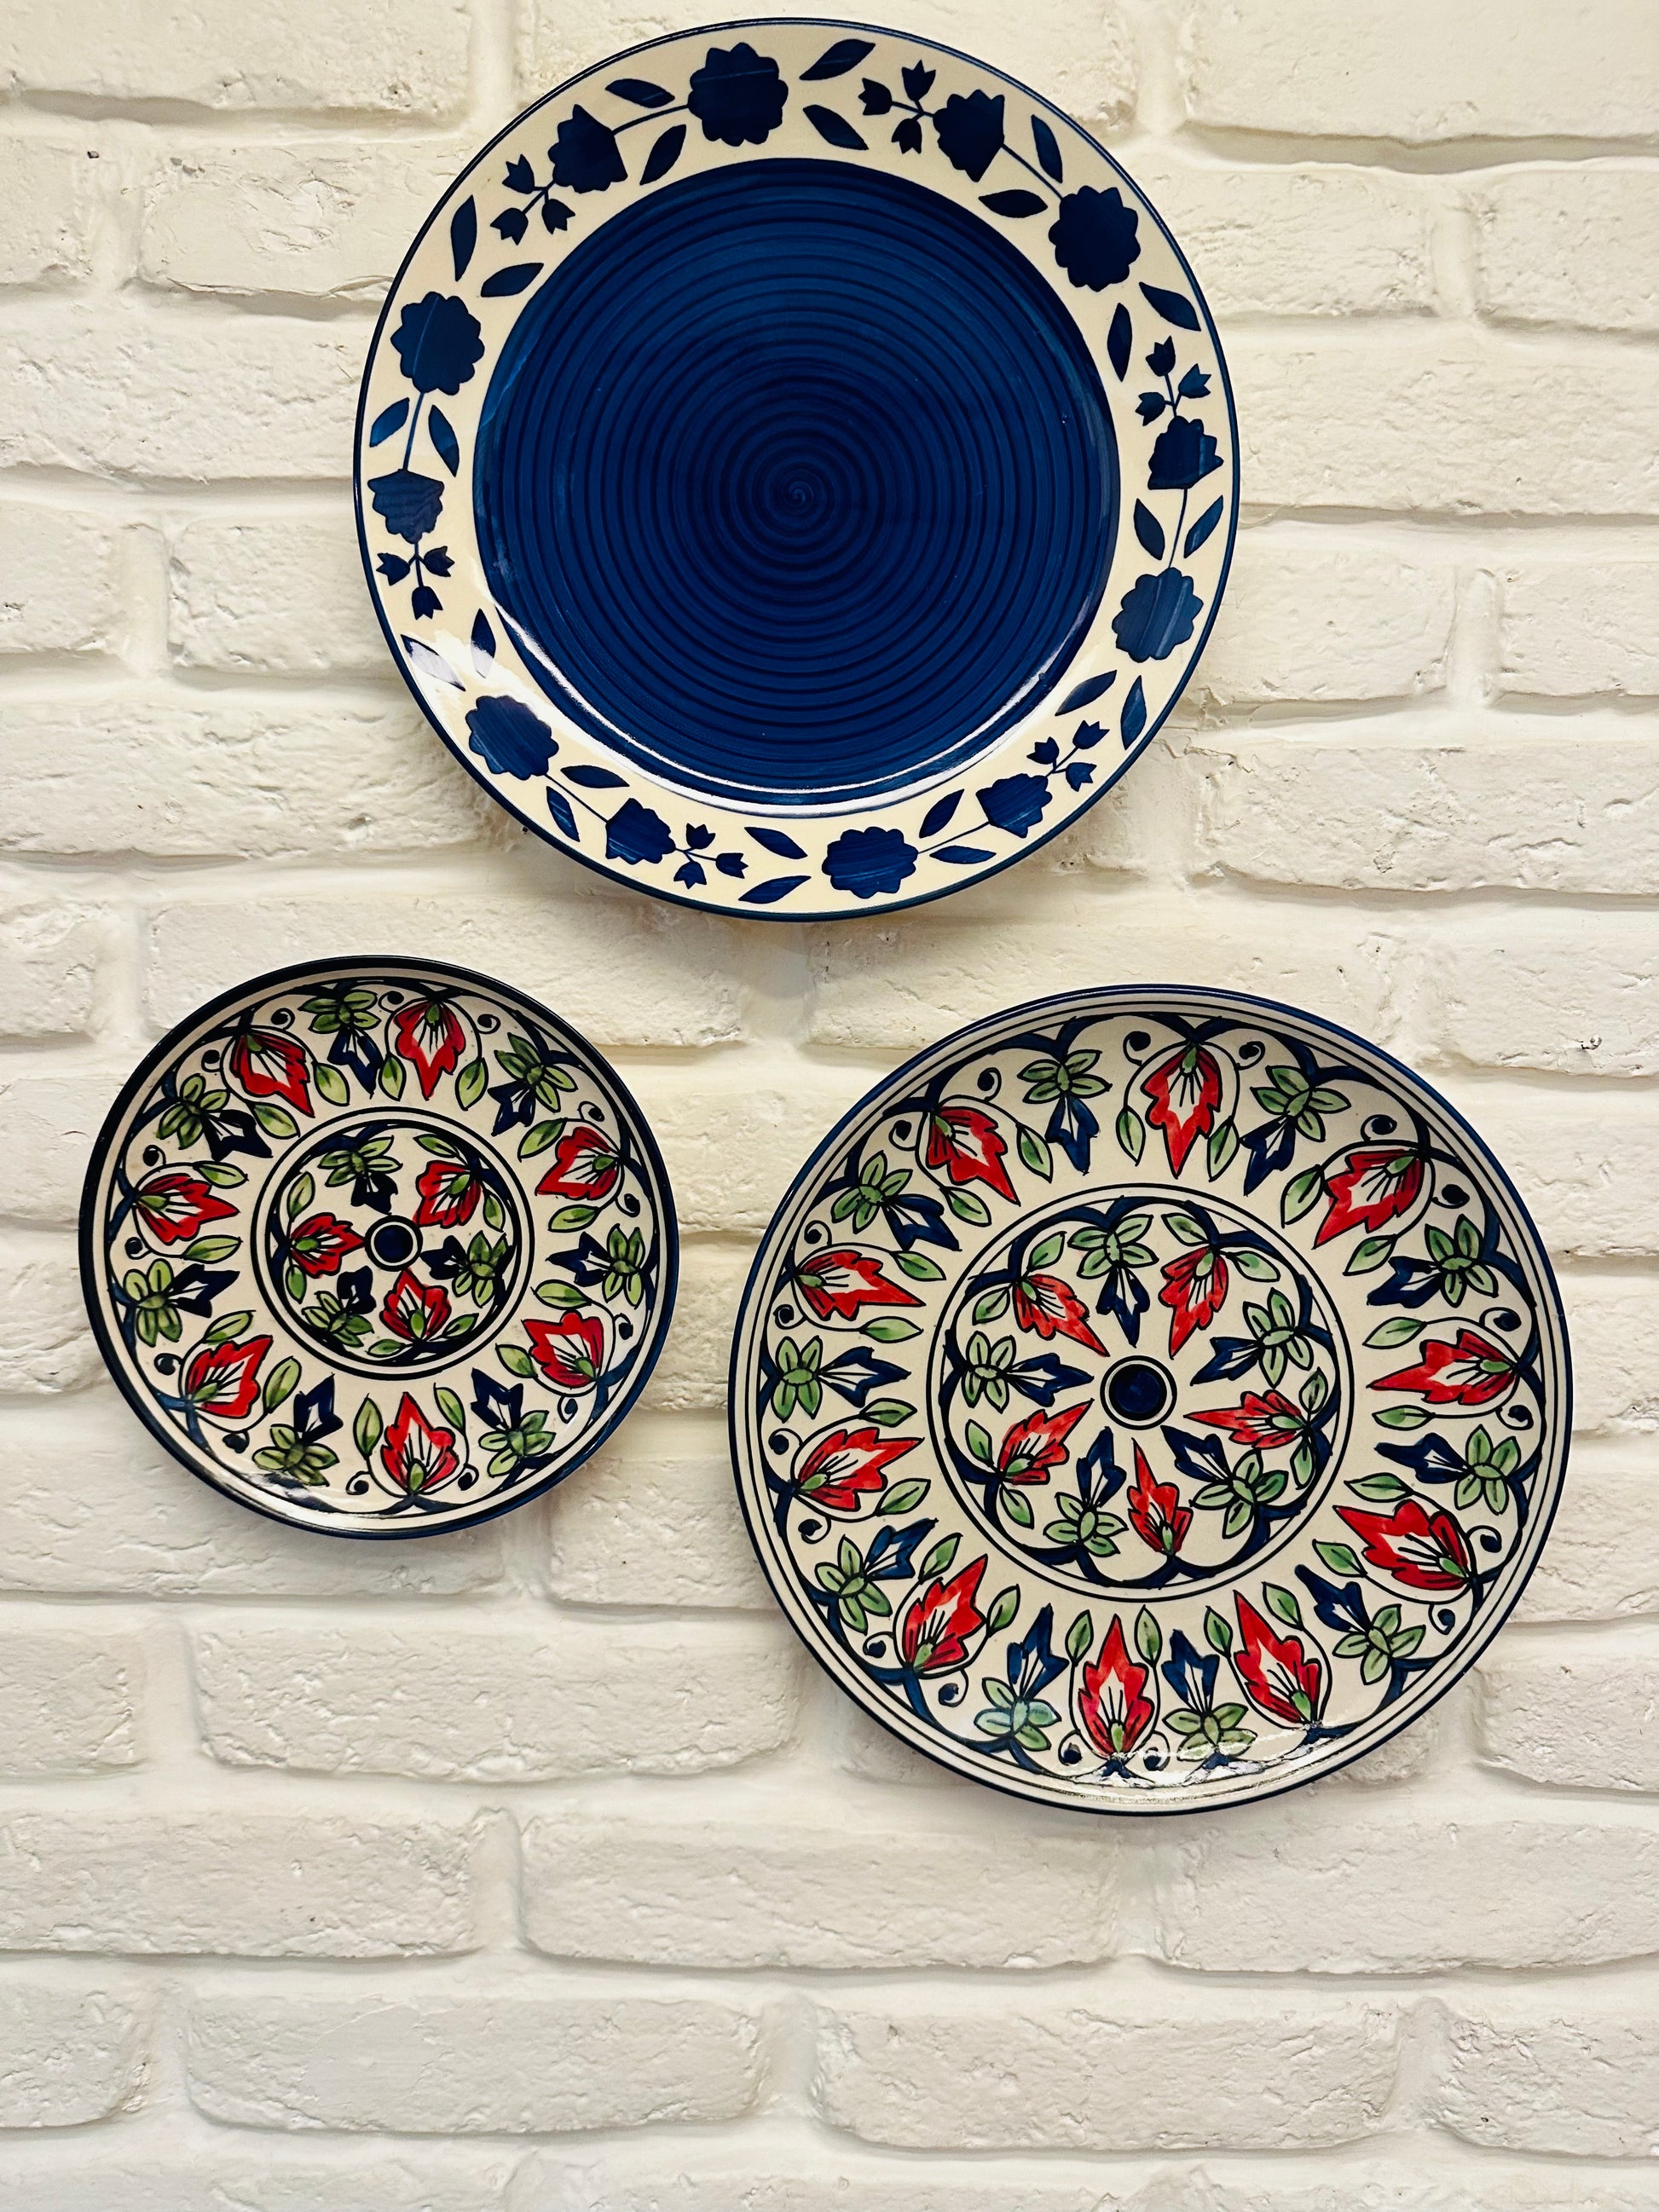  Artisanal Wall Plate Collection, Bedroom Wall Plate Ensemble, Classical Appeal Wall Décor, Classical Indian Wall Décor, Designer Wall Plate Set, Hand Painted Artisanal Plates, Handcrafted Home Accents, Handcrafted Indian Artisans, Iris Hand Painted Wall Plates, Small Batch High-Quality Décor, Unique Handcrafted Wall Plates, Unique Living Room Décor, Vibrant Iris Wall Art, Vibrant Wall Accent Pieces, Wall Hanging Hook Included, tesu